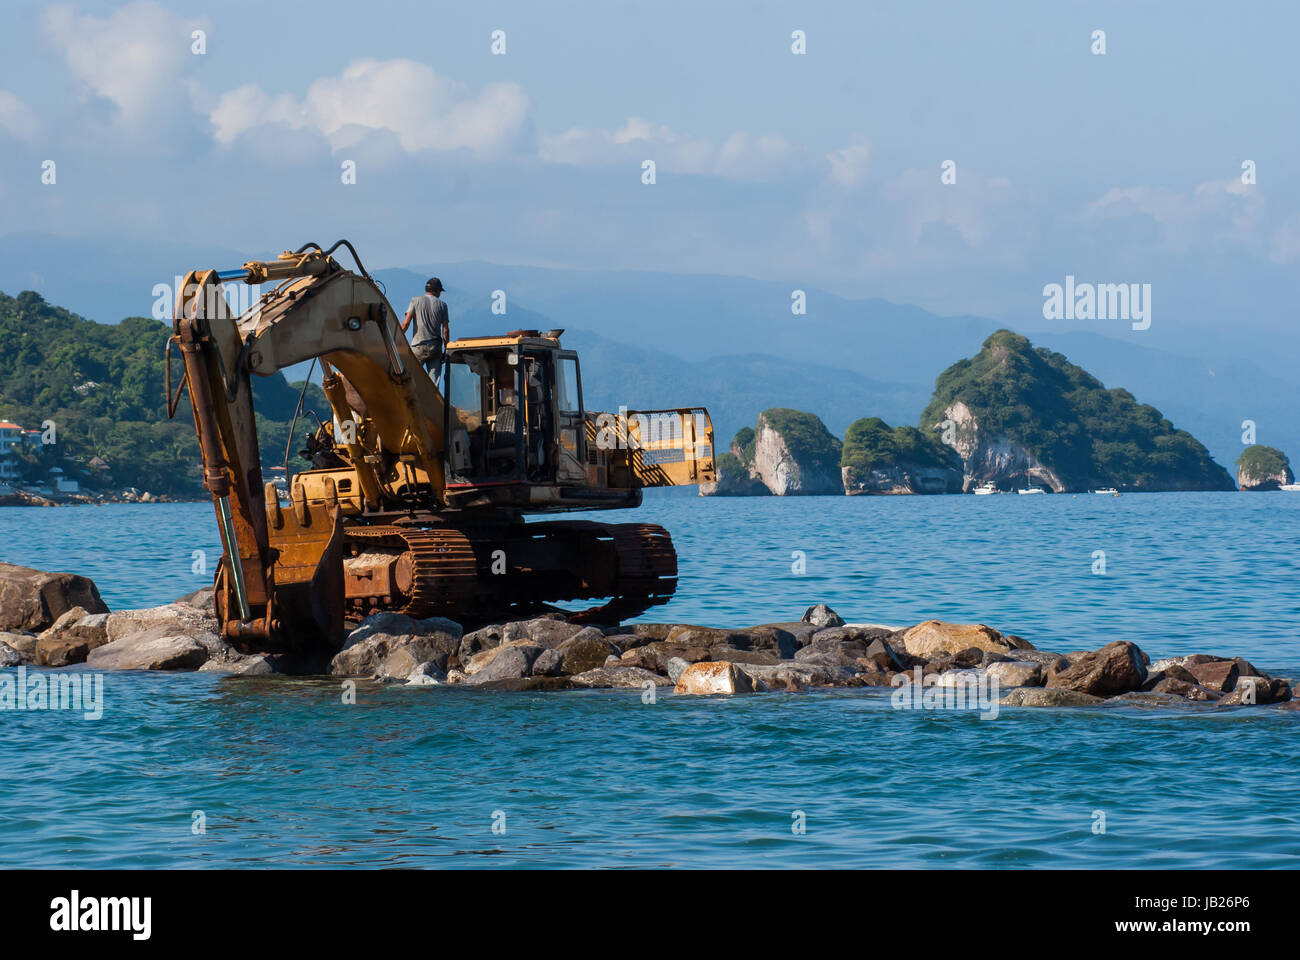 An excavator on a pile of rocks out on the ocean. Los Arcos islands south of Puerto Vallarta in the background. Stock Photo